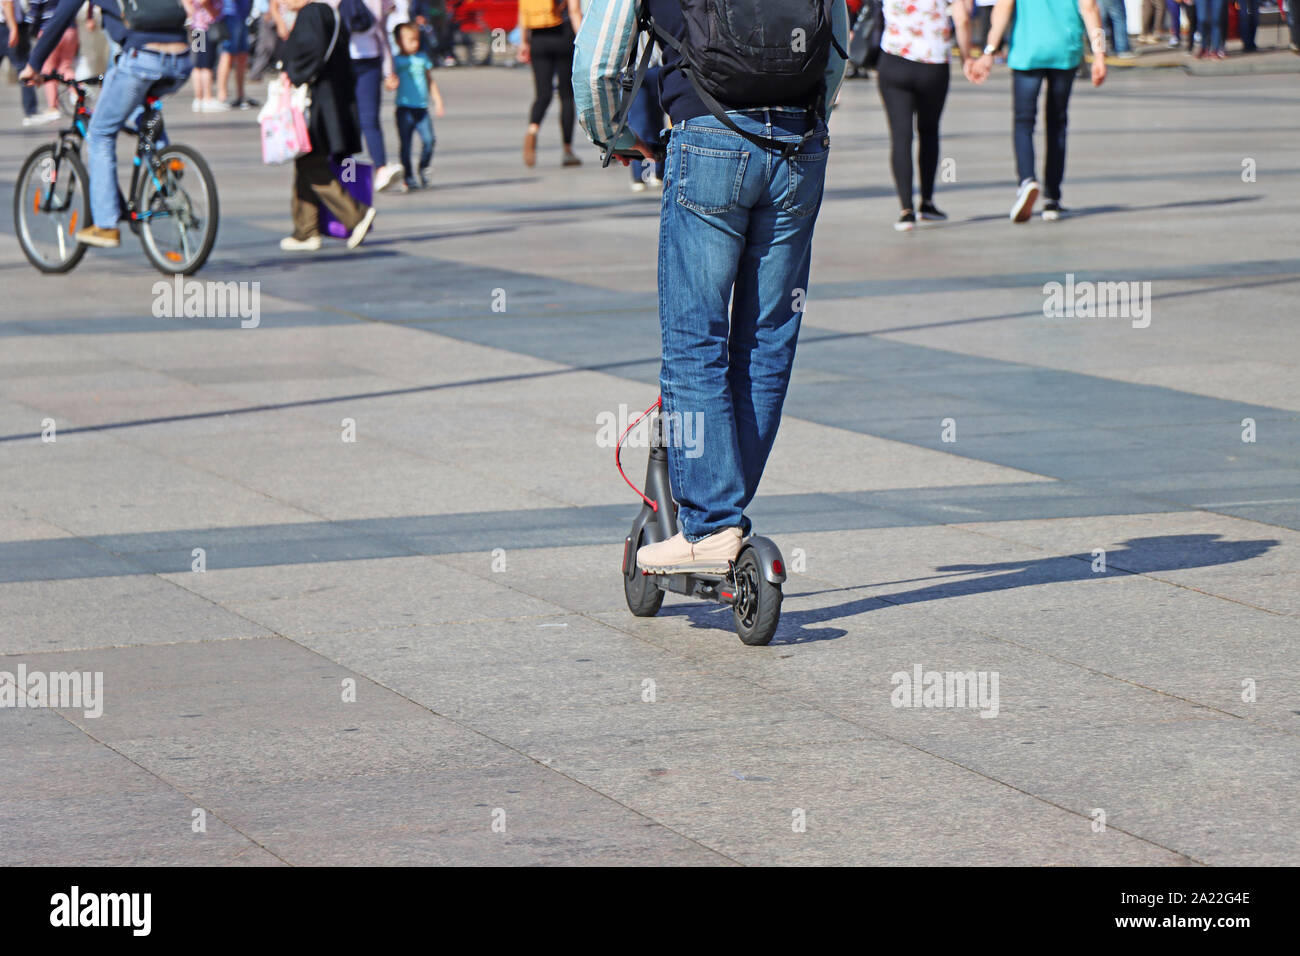 Man riding a kick scooter at the city square Stock Photo